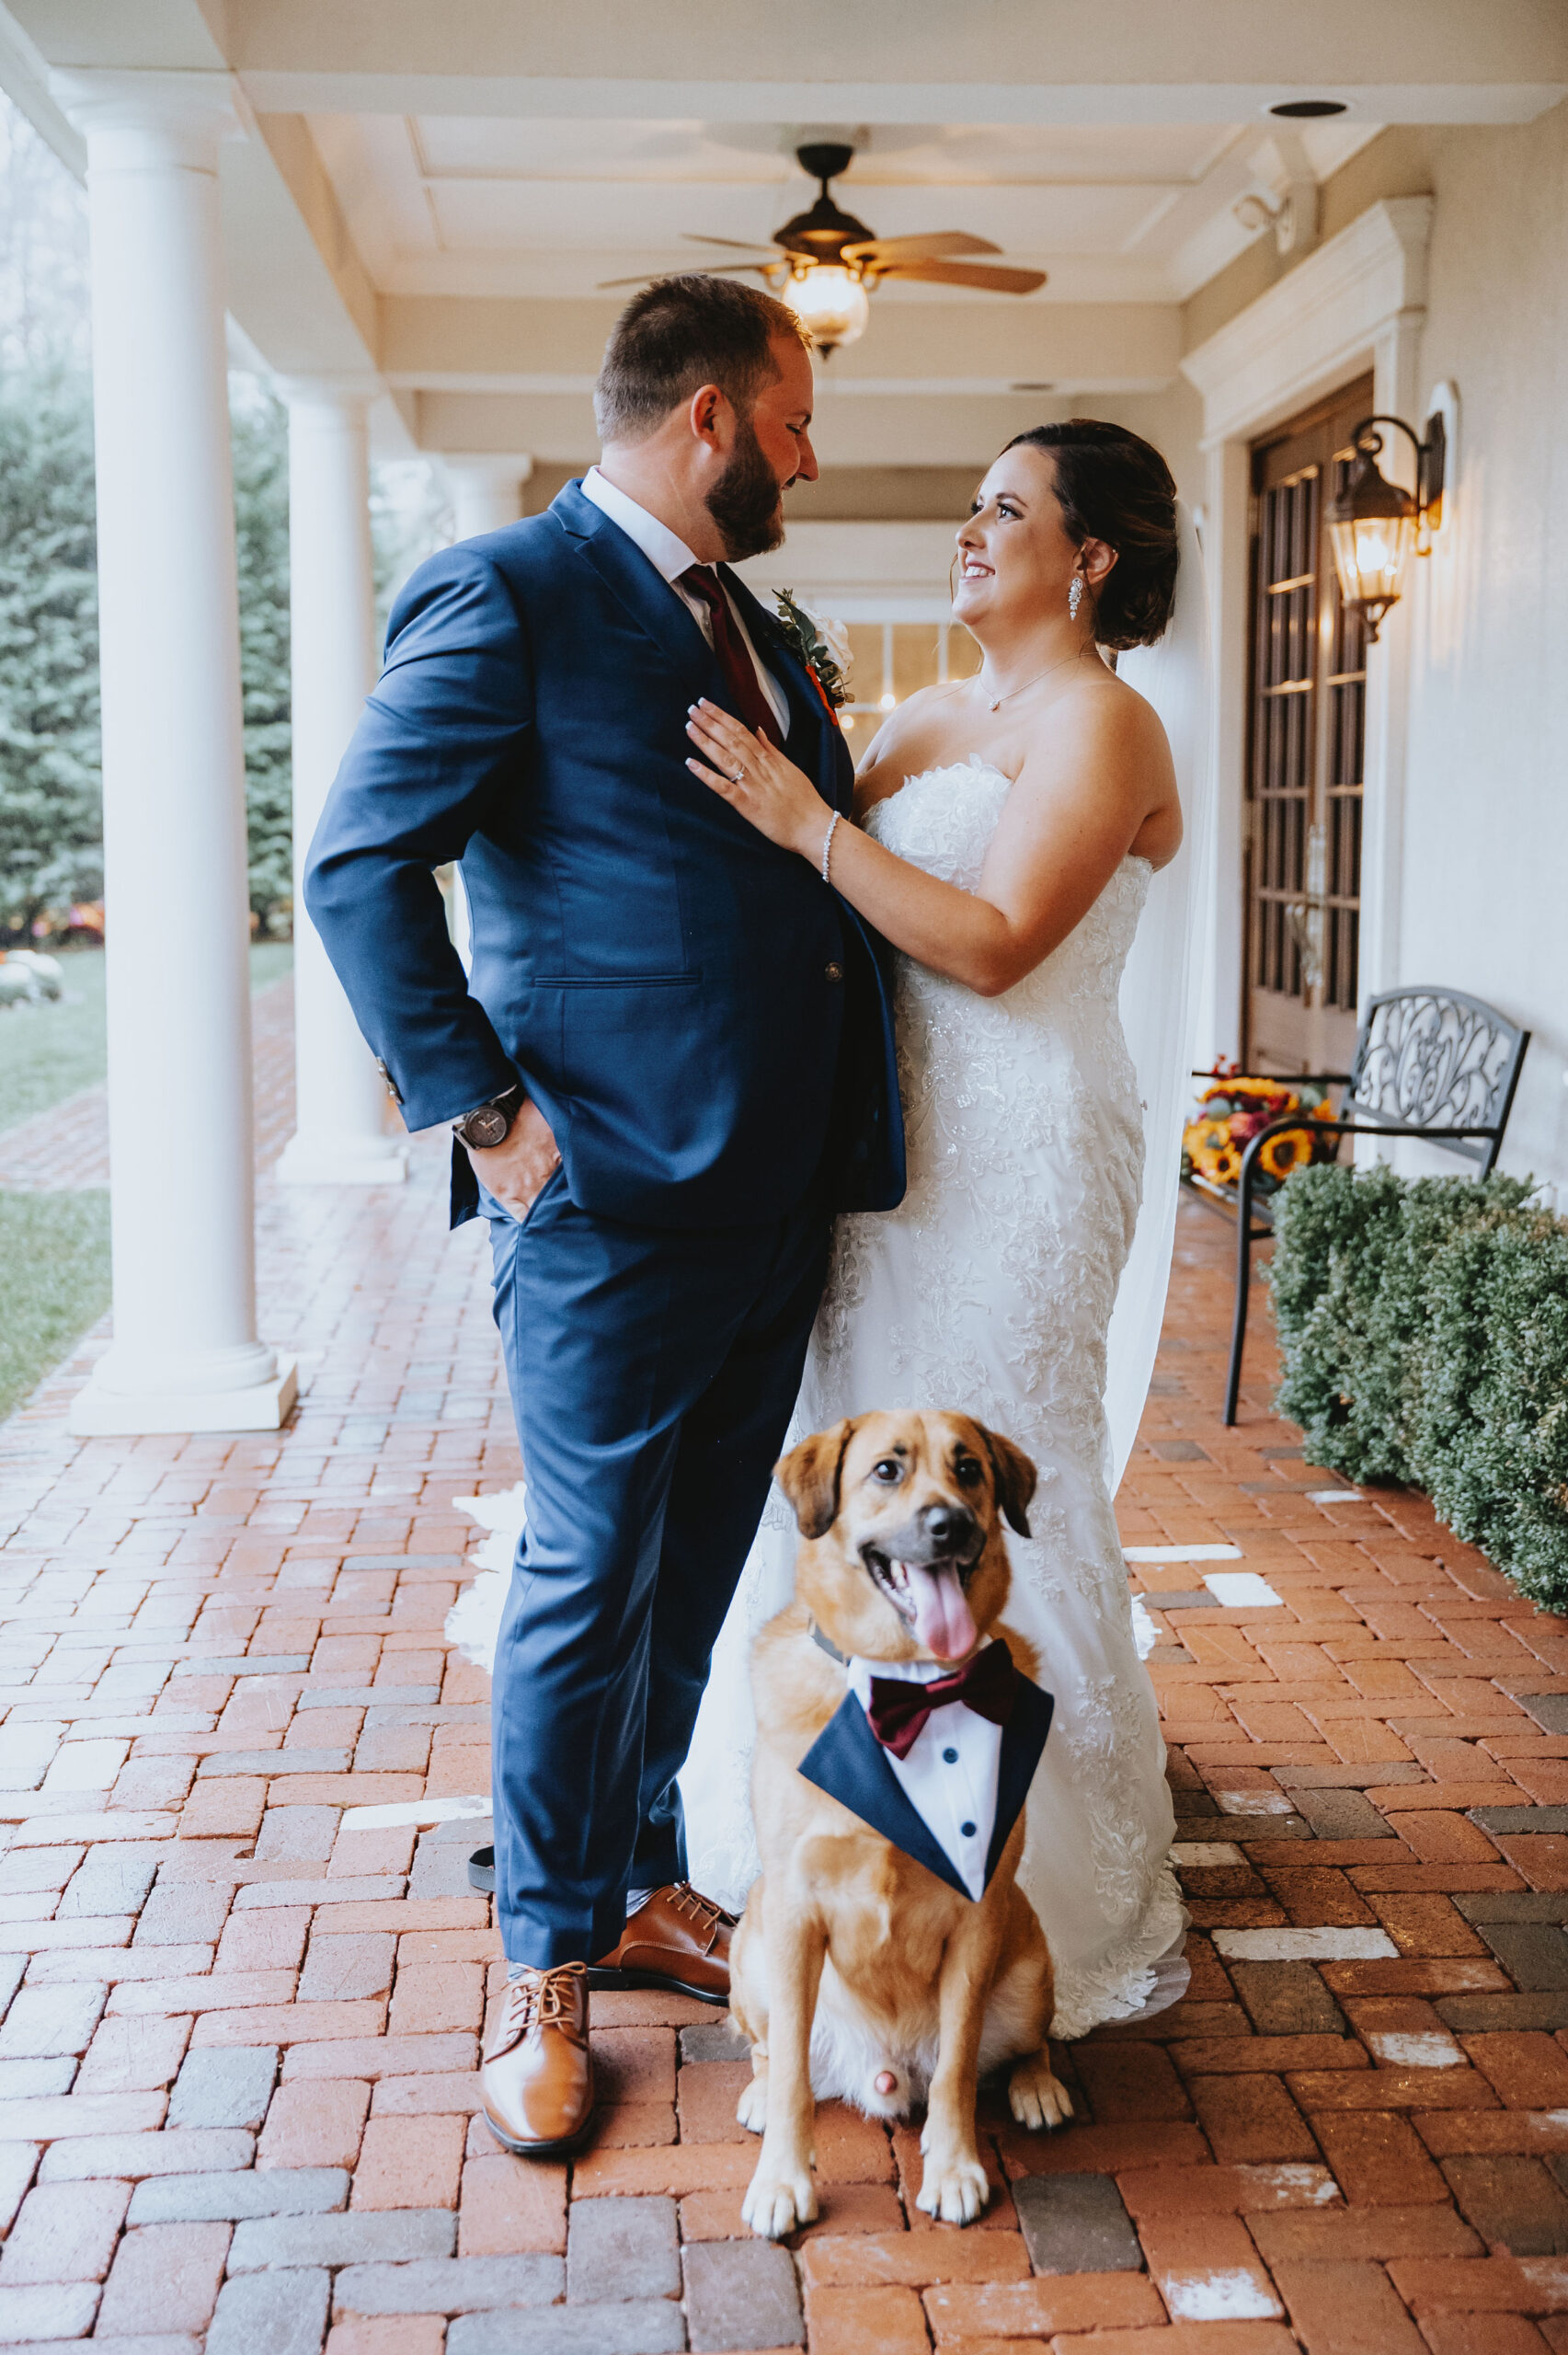 Considering Pets At Wedding? Here's What You Need to Know